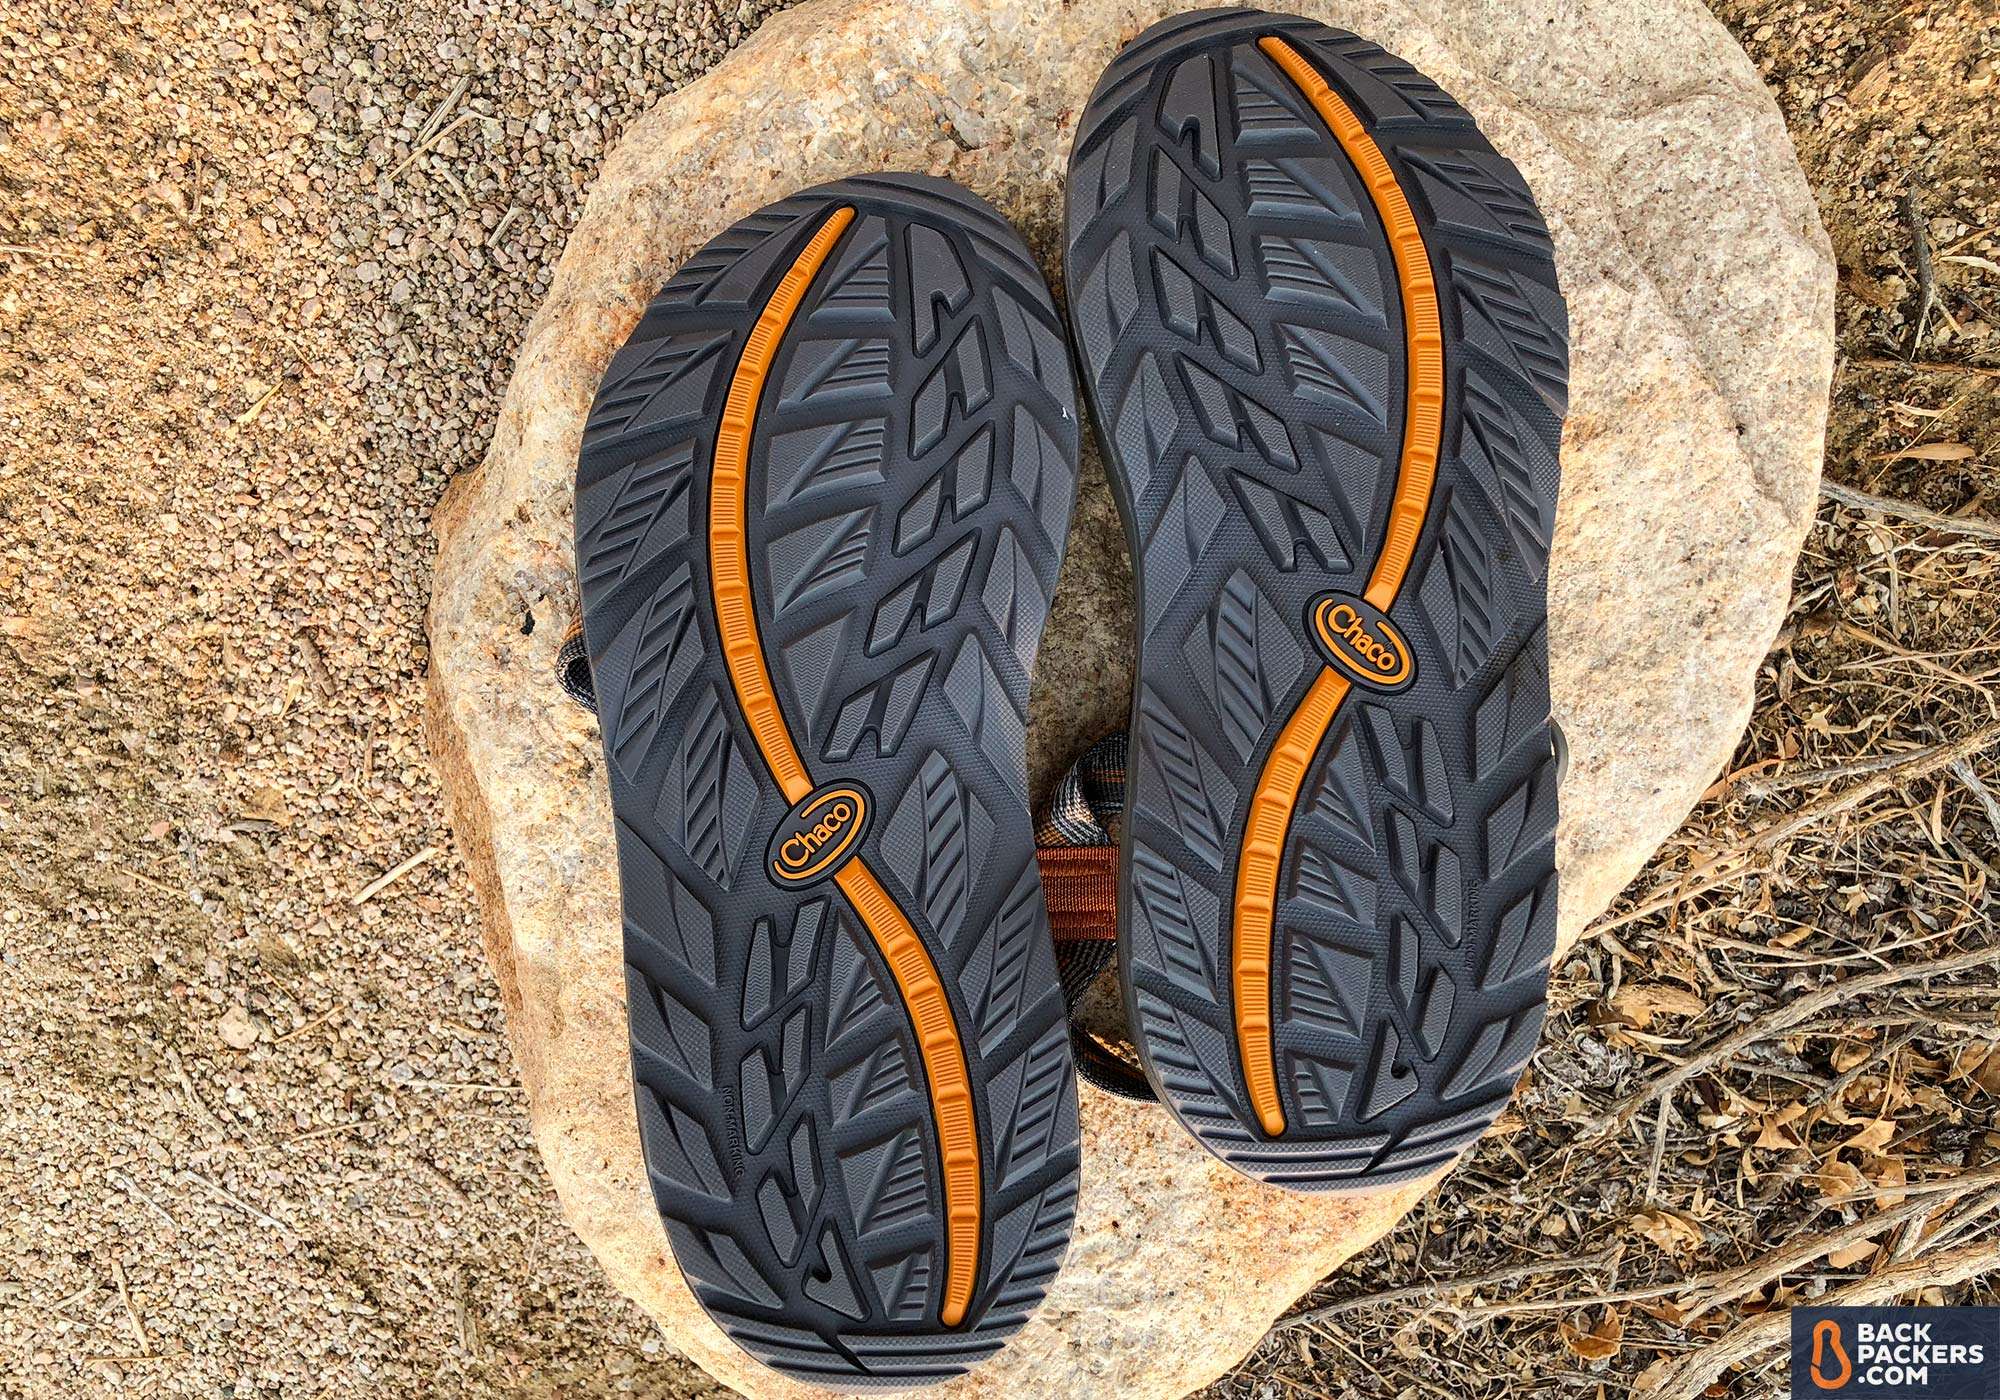 chacos with vibram sole